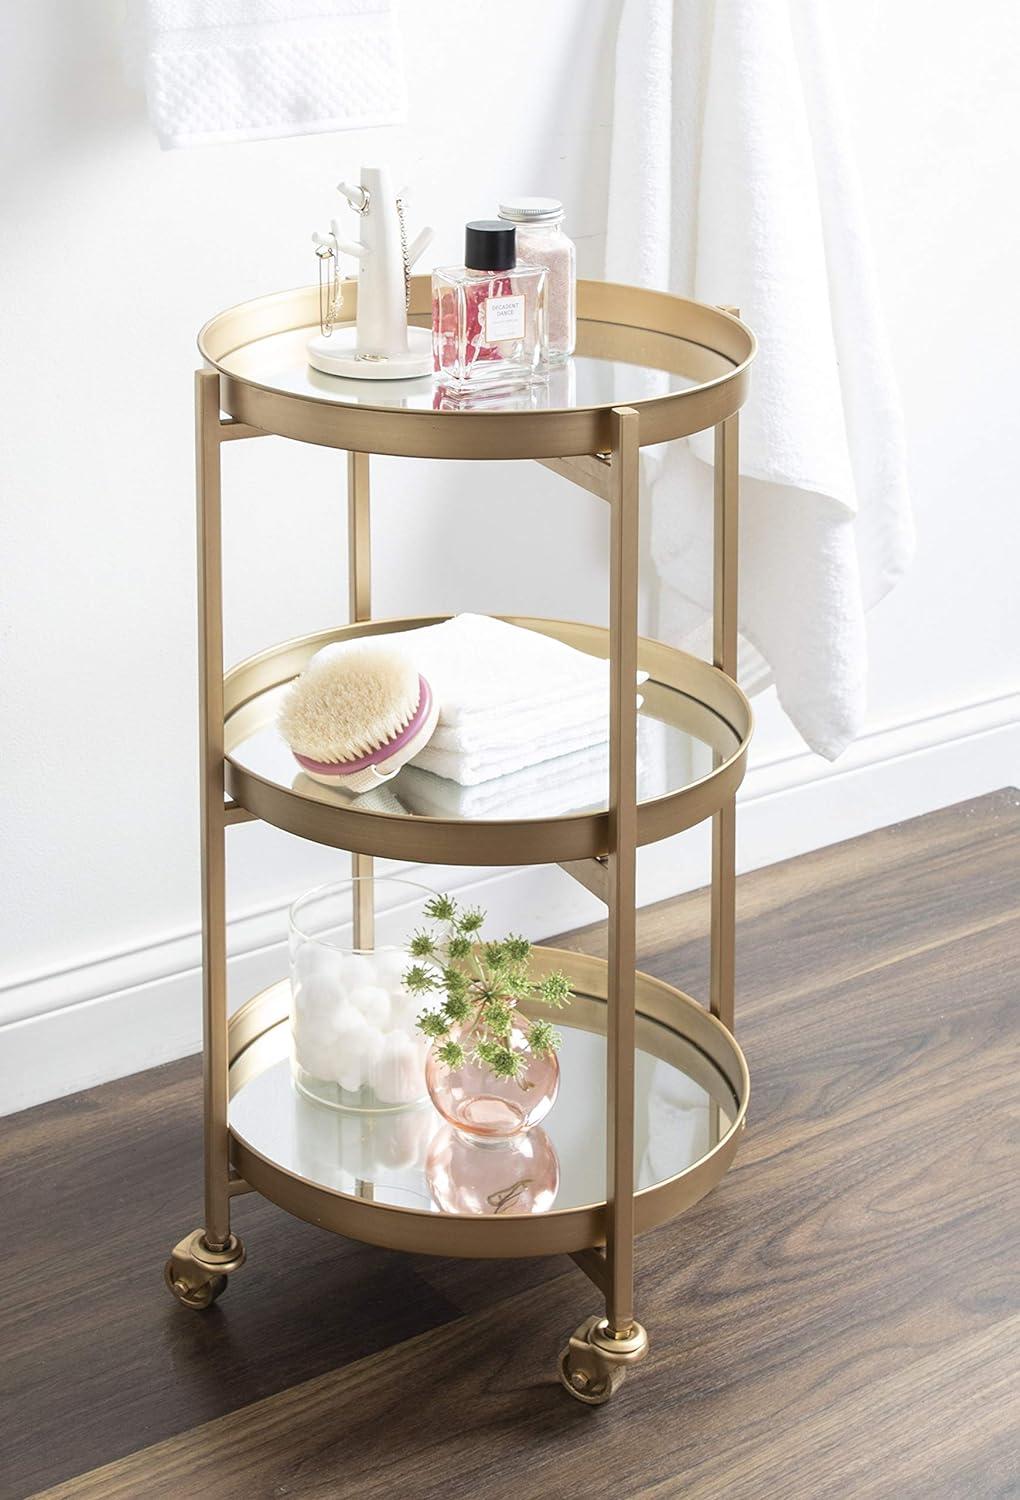 Celia Gold Finish 3-Tier Round Metal Bar Cart with Mirror Trays